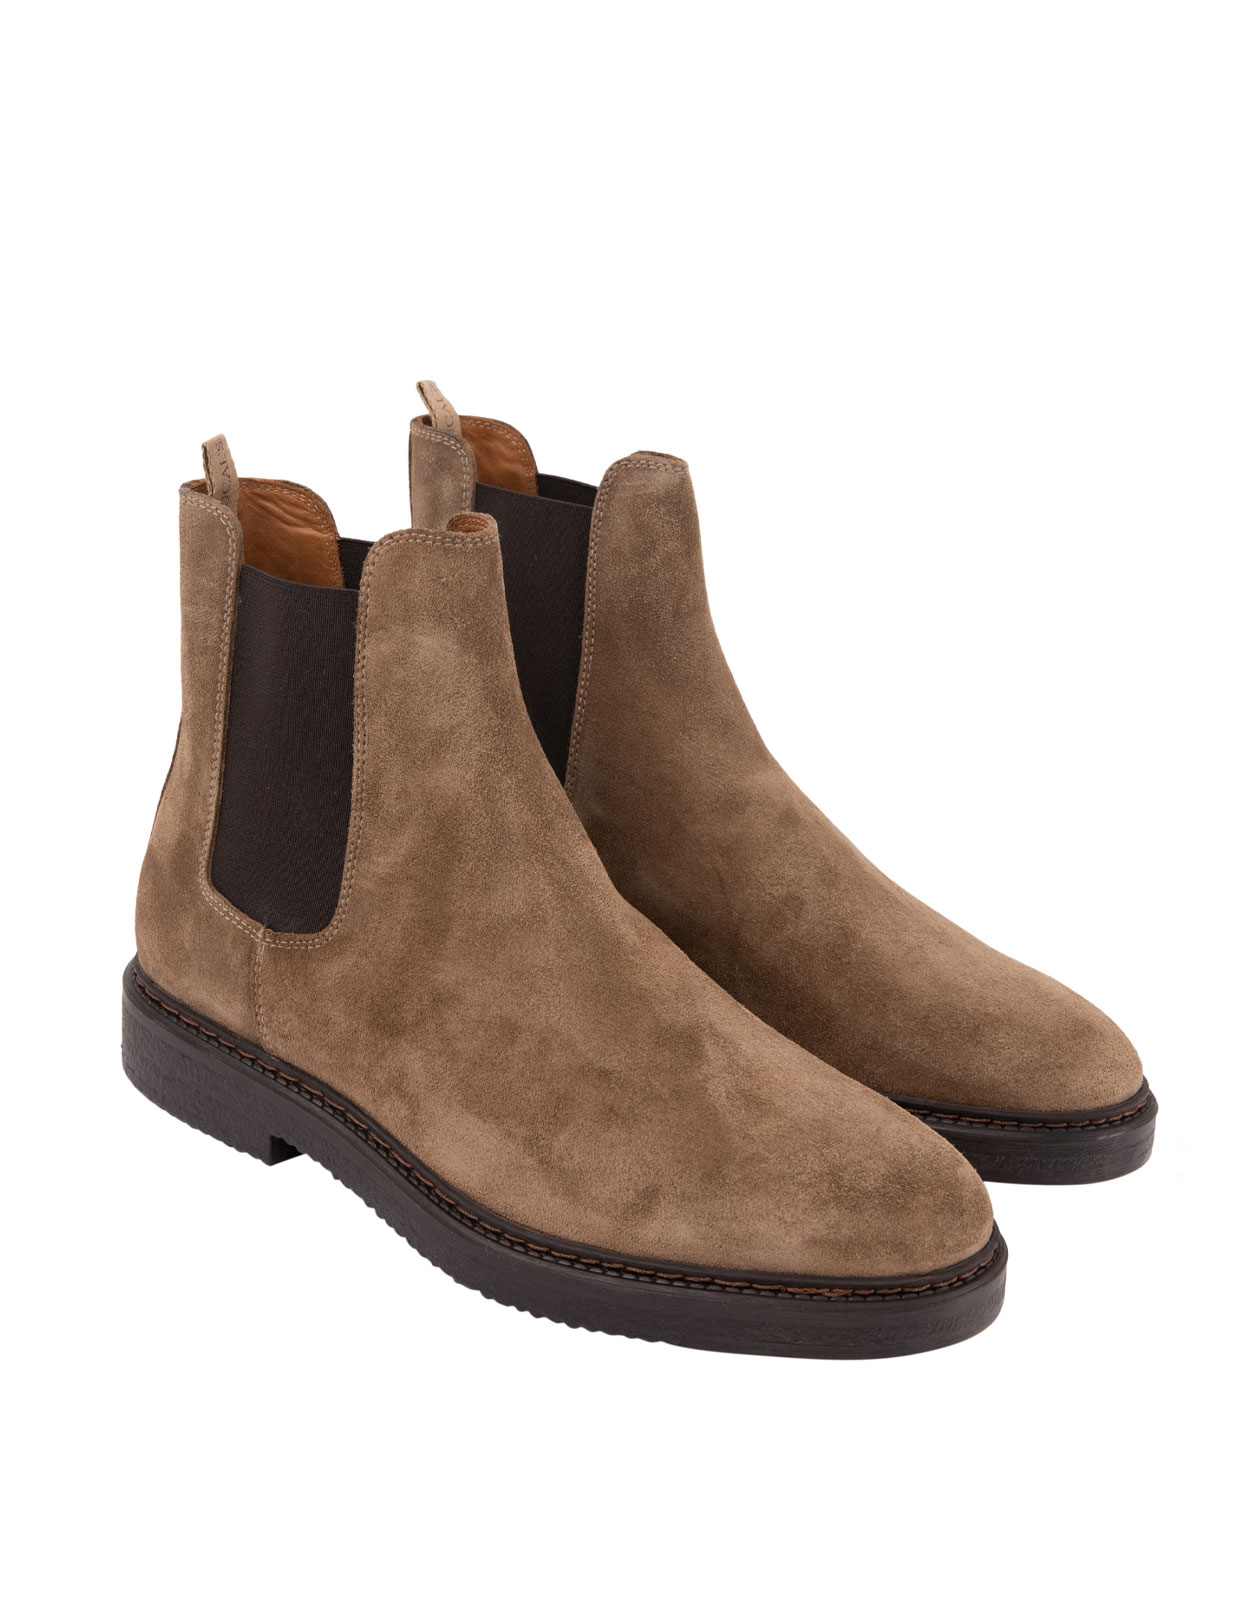 Chelsea Boots Tabacco Stl 41